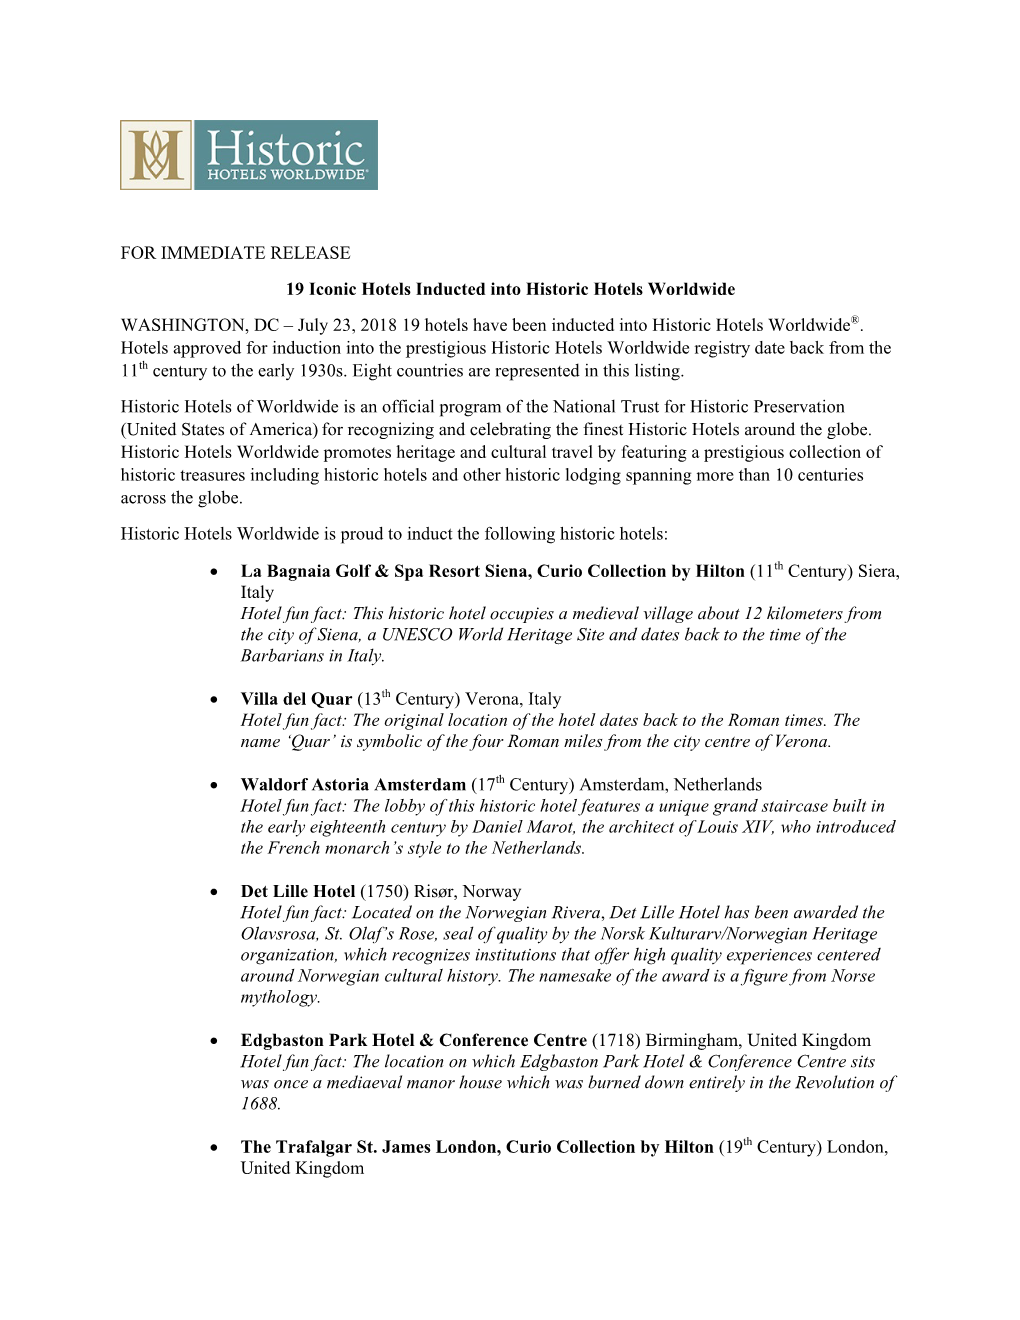 FOR IMMEDIATE RELEASE 19 Iconic Hotels Inducted Into Historic Hotels Worldwide WASHINGTON, DC – July 23, 2018 19 Hotels Have B